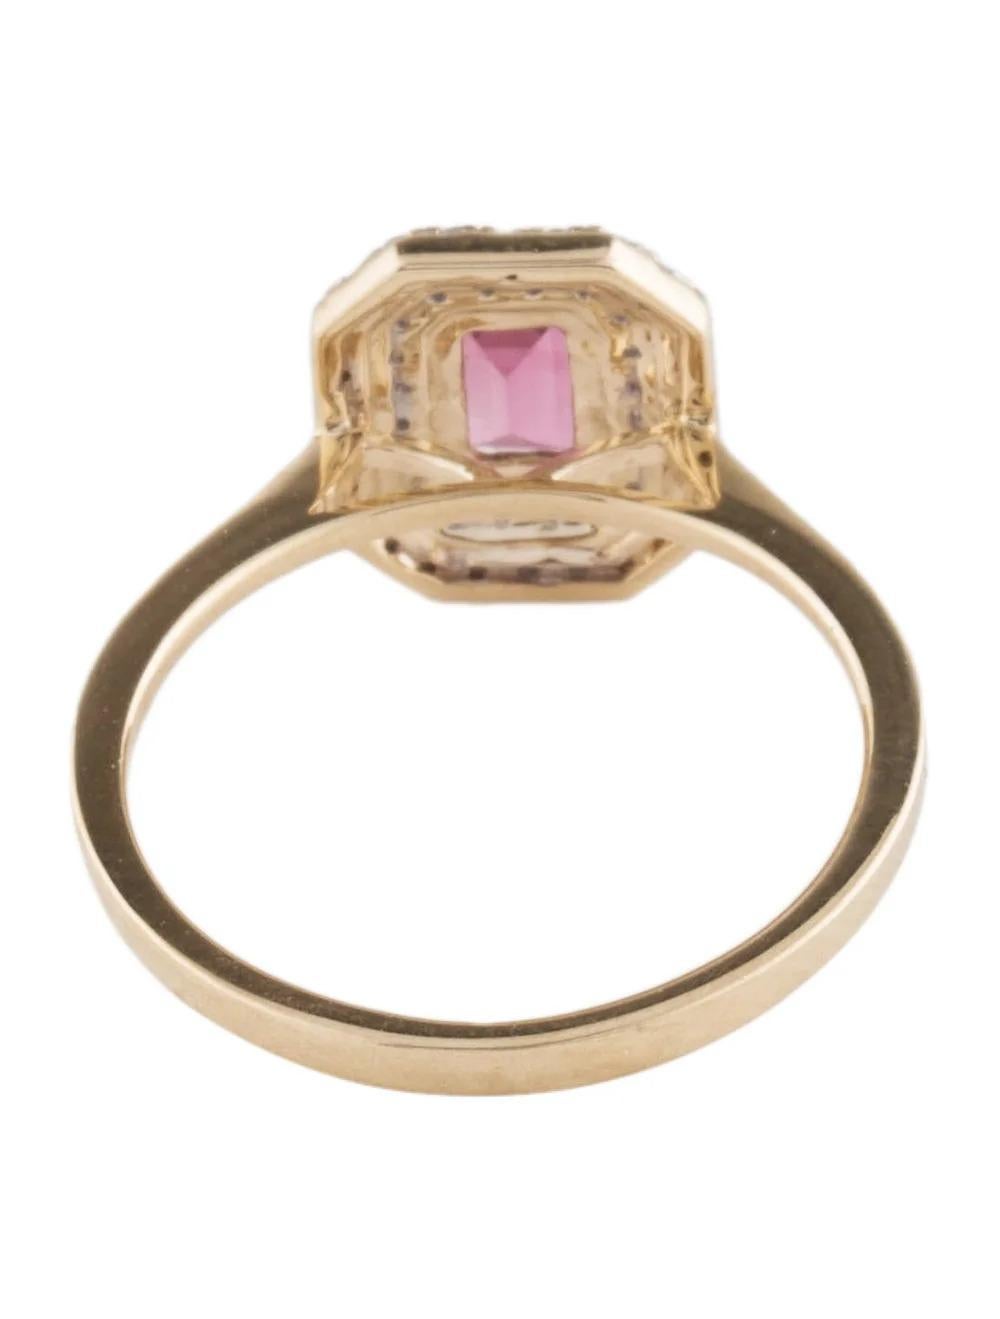 14K Tourmaline & Diamond Cocktail Ring, Size 6.5 - Stunning Gemstones Jewelry In New Condition For Sale In Holtsville, NY